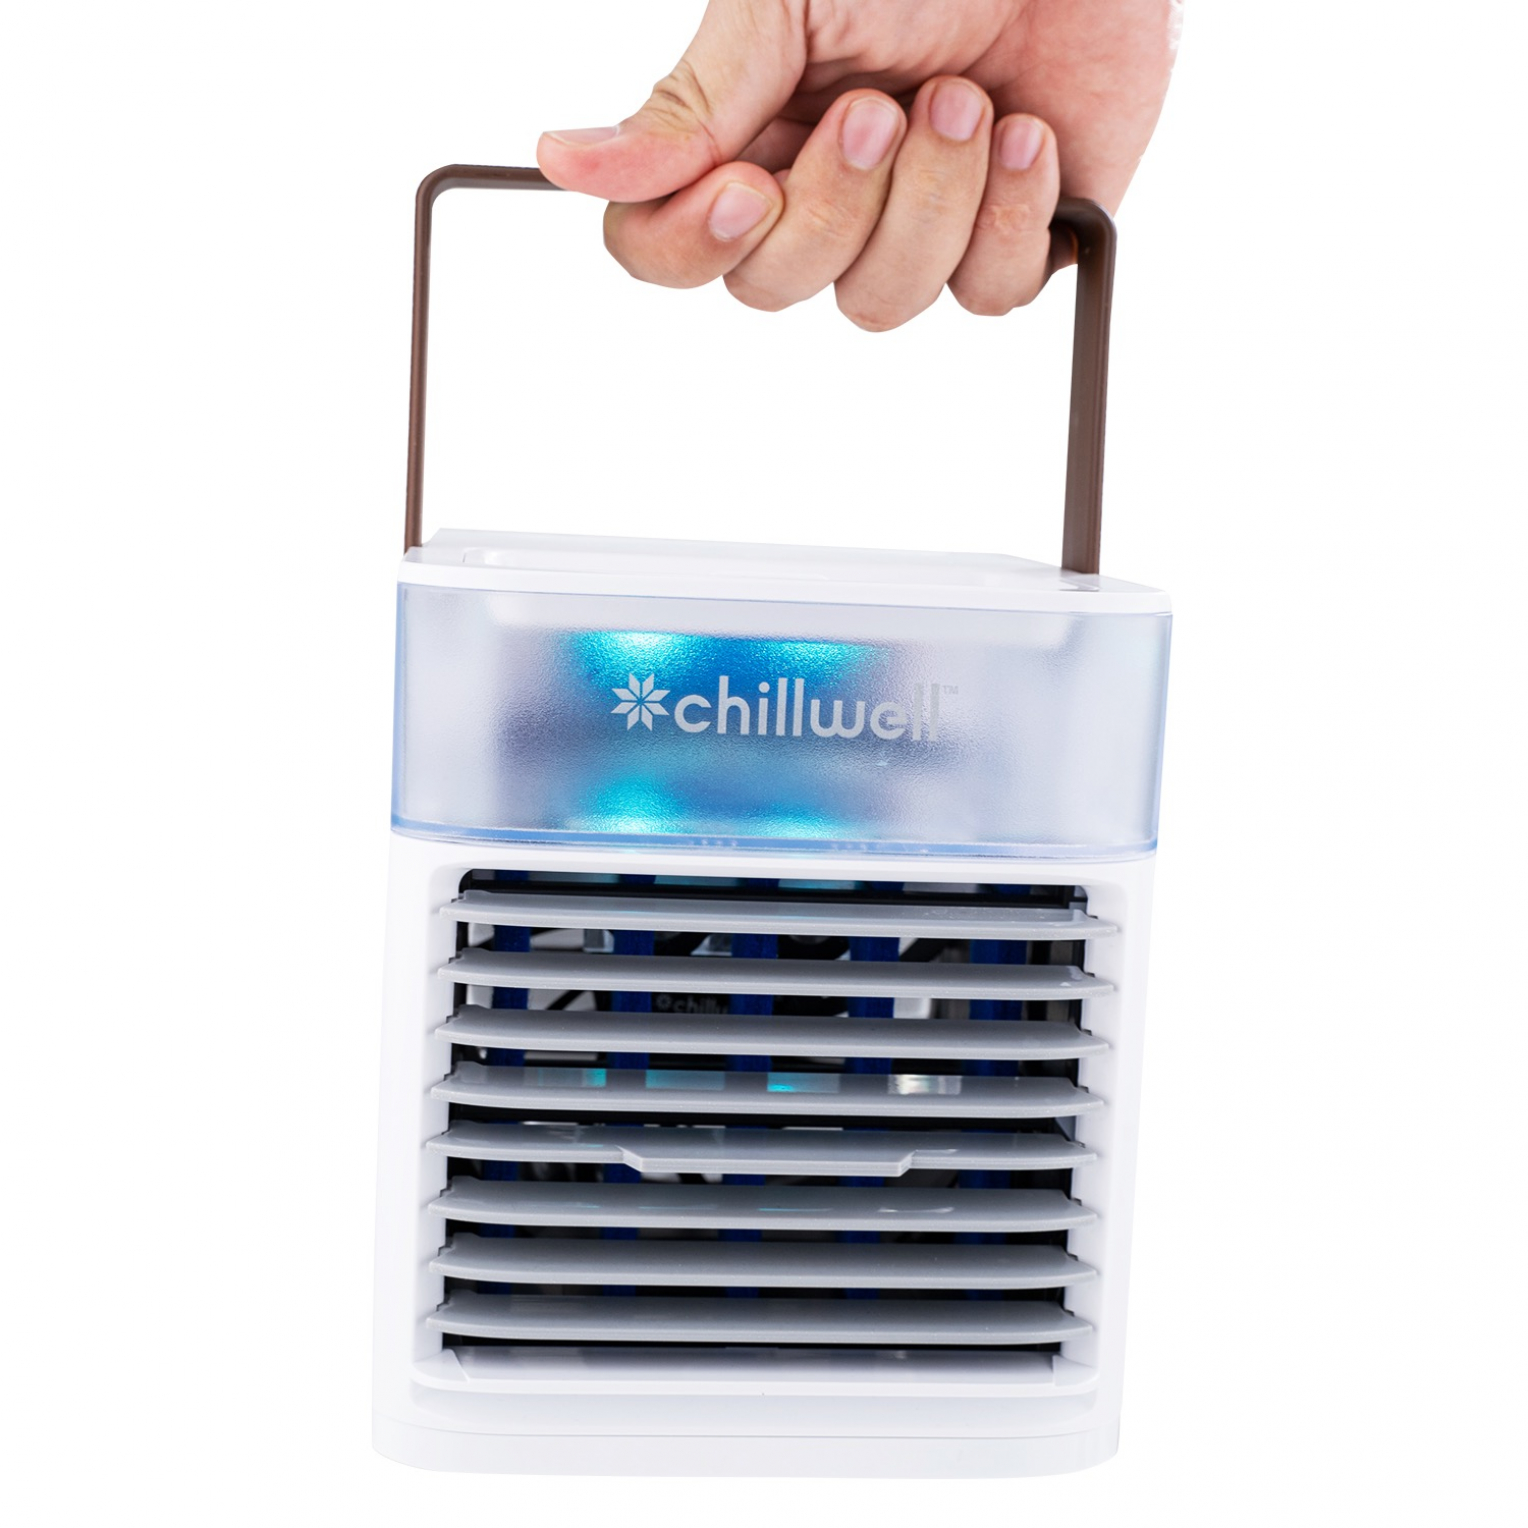 Review Chillwell Ac Evaporative Cooler